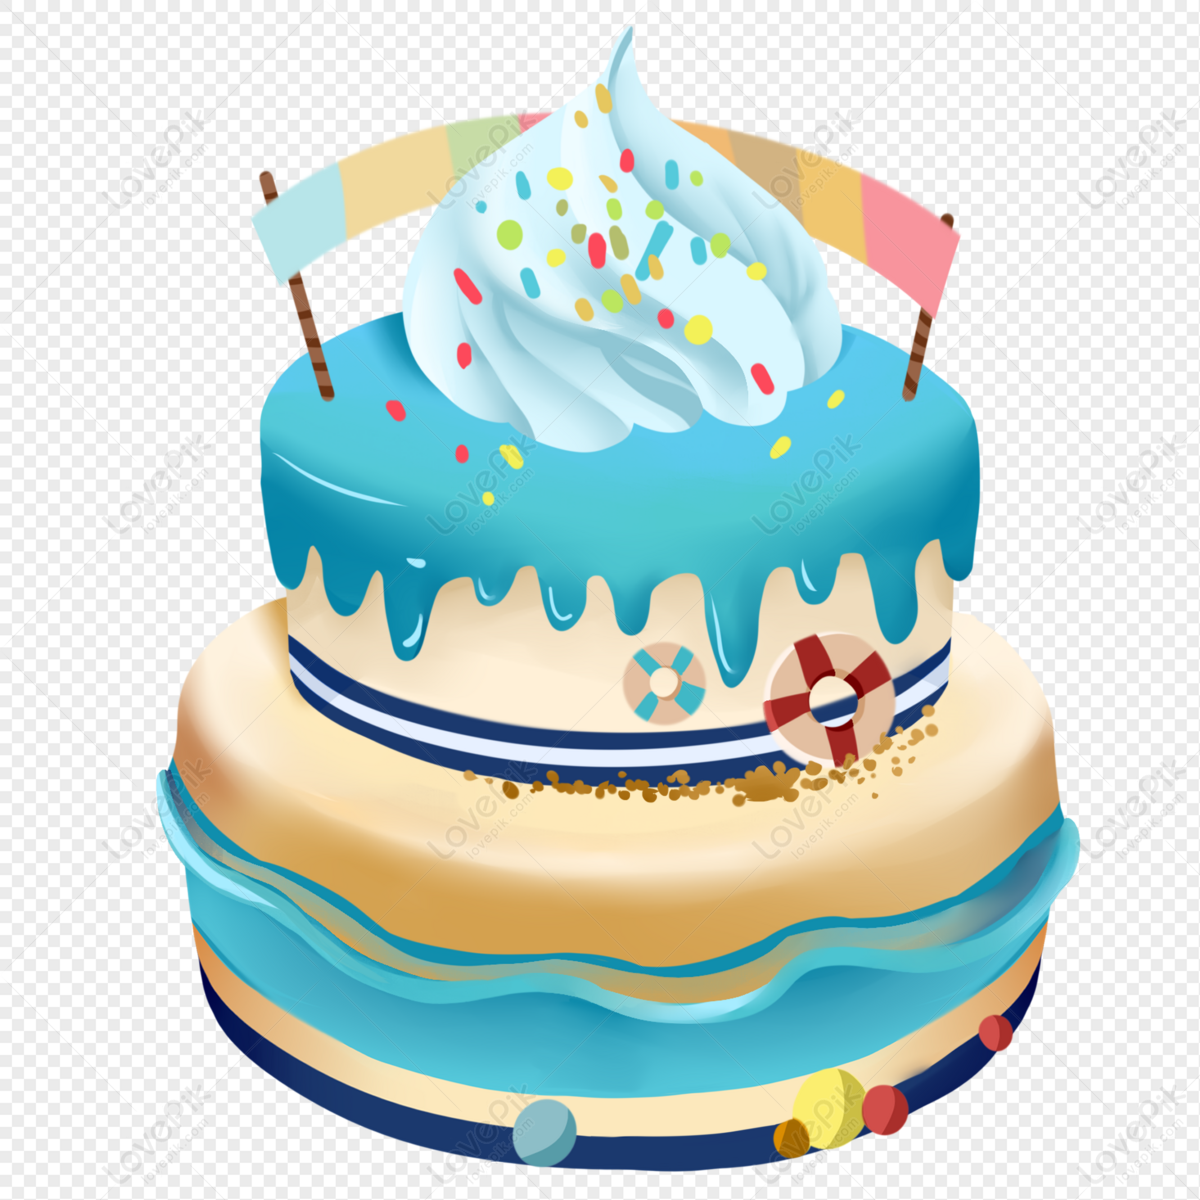 Cake PNG image transparent image download, size: 4285x3095px